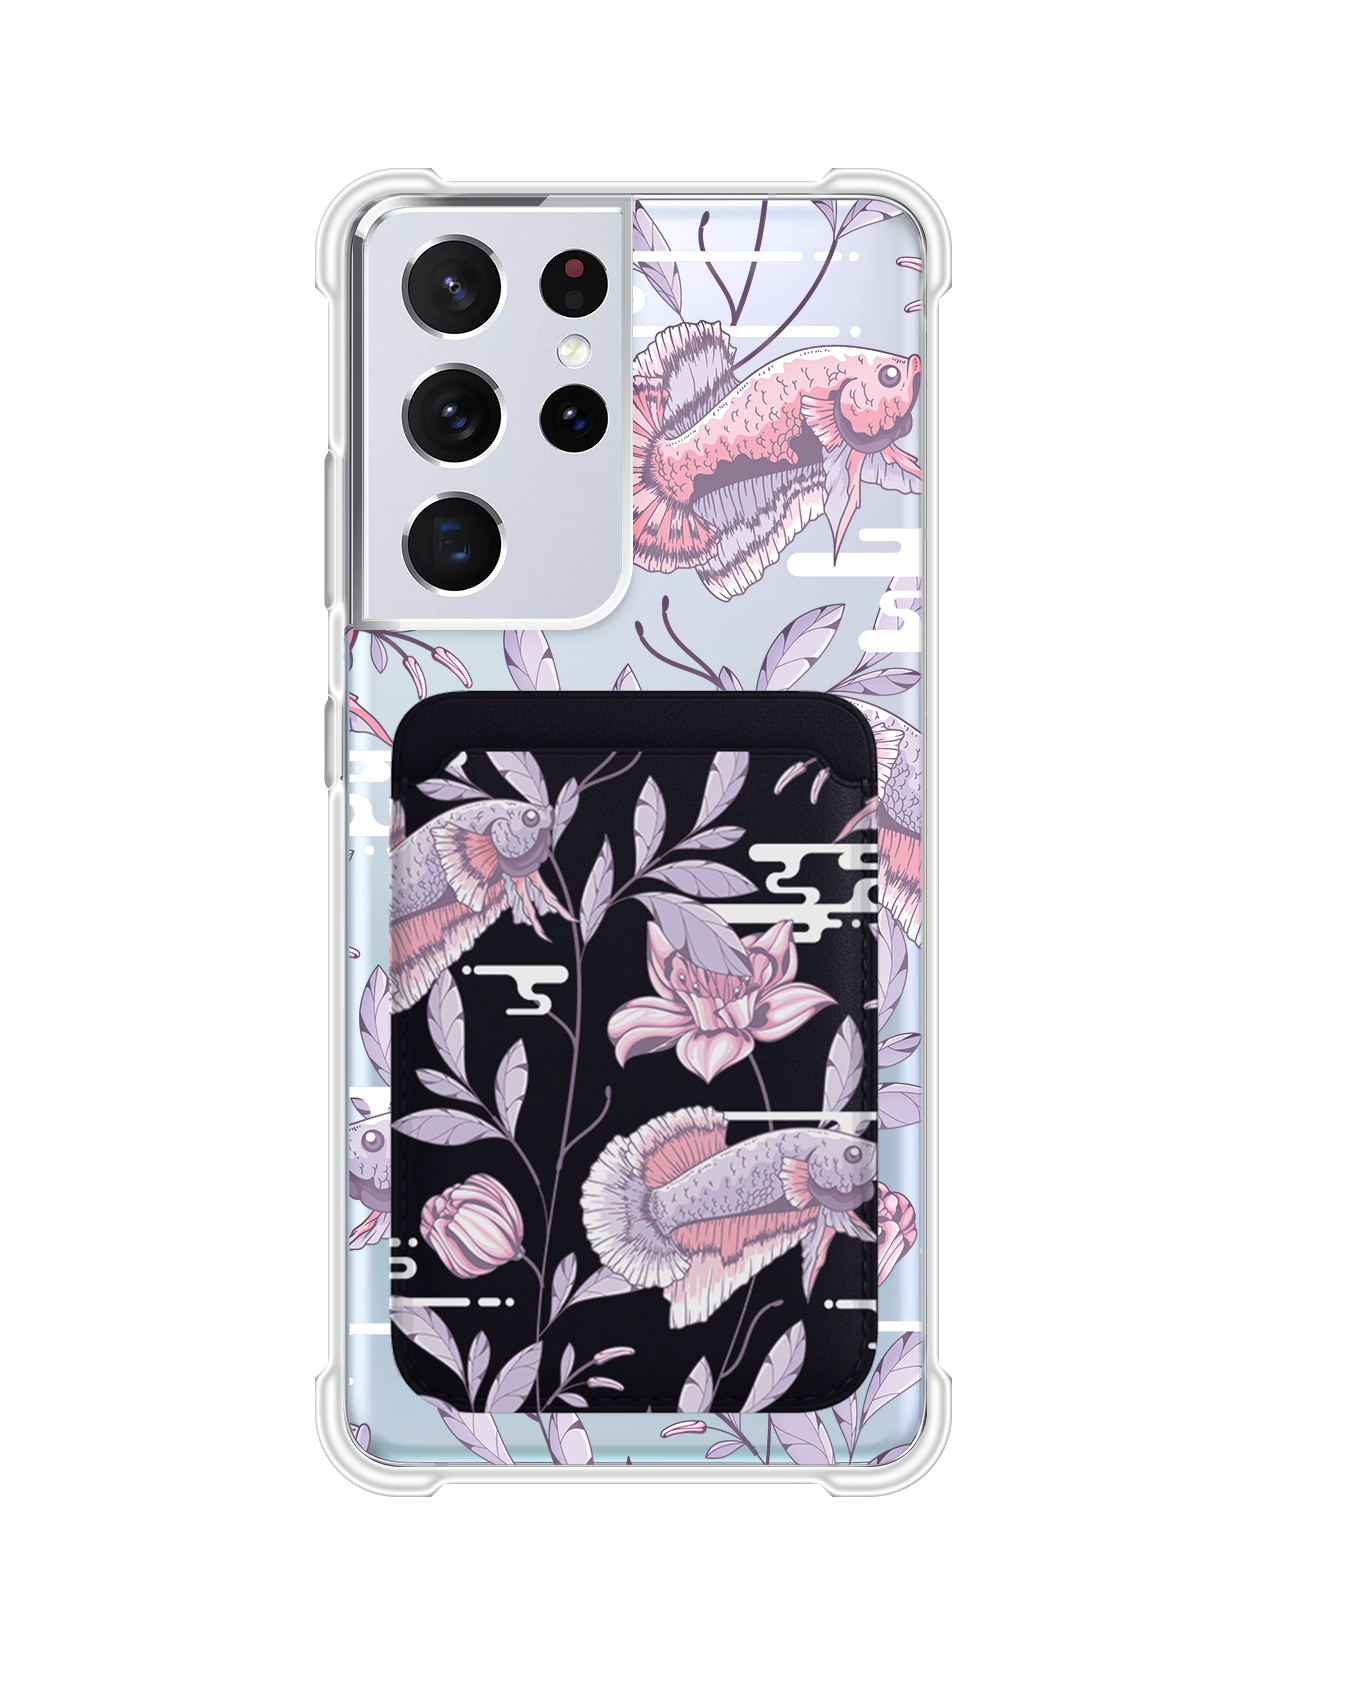 Android Magnetic Wallet Case - Fish & Floral 1.0